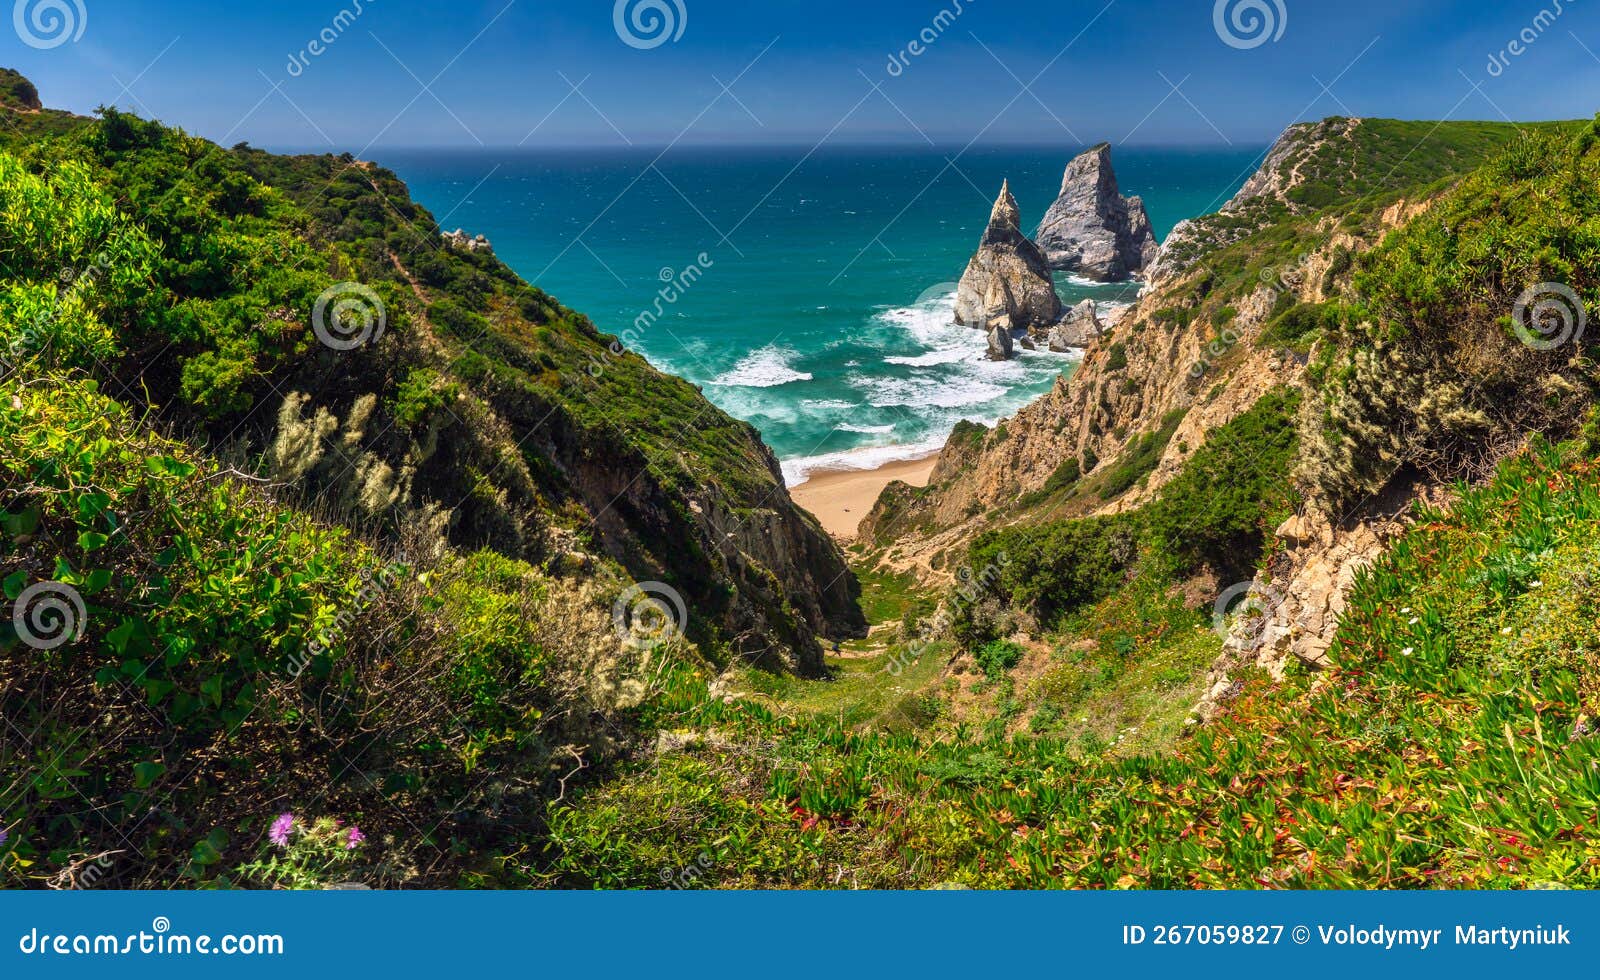 amazing panorama of rocky shore atlantic ocean. view of high cliffs, green hills, foamy waves and sandy beach. sunny summer seasca